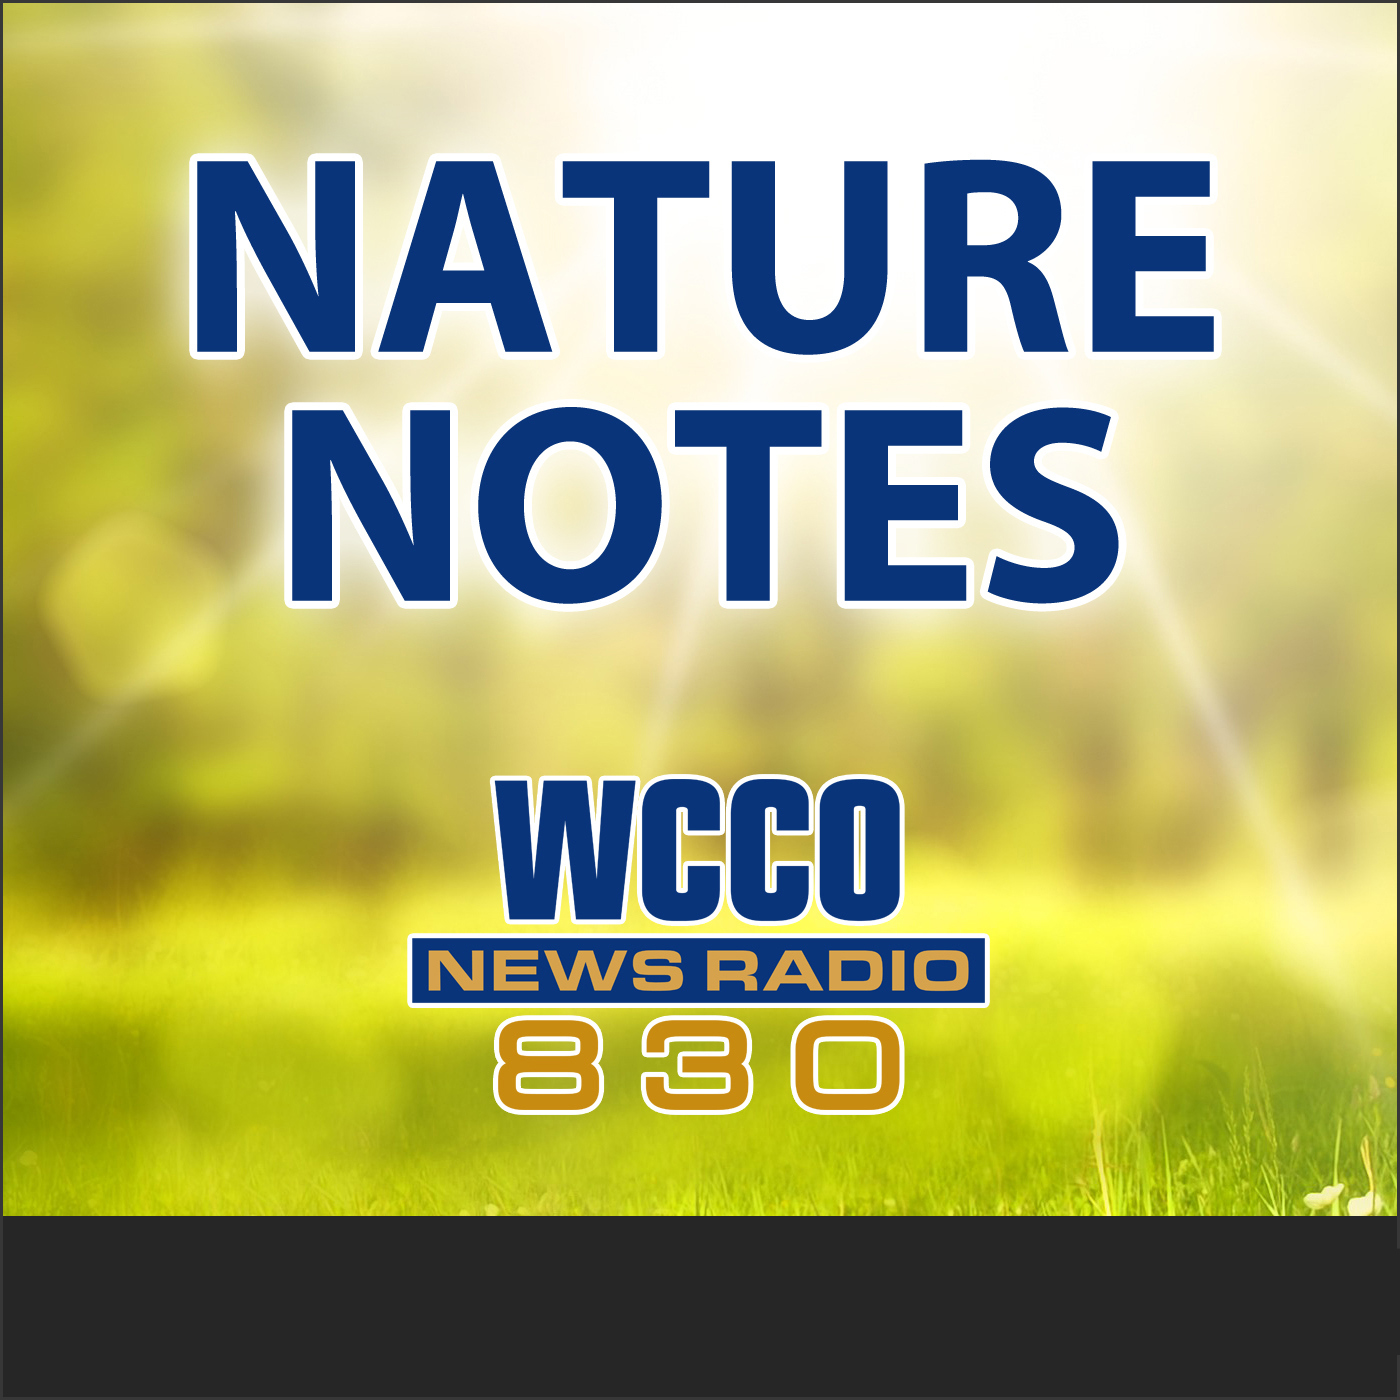 NATURE NOTES 4-21-19